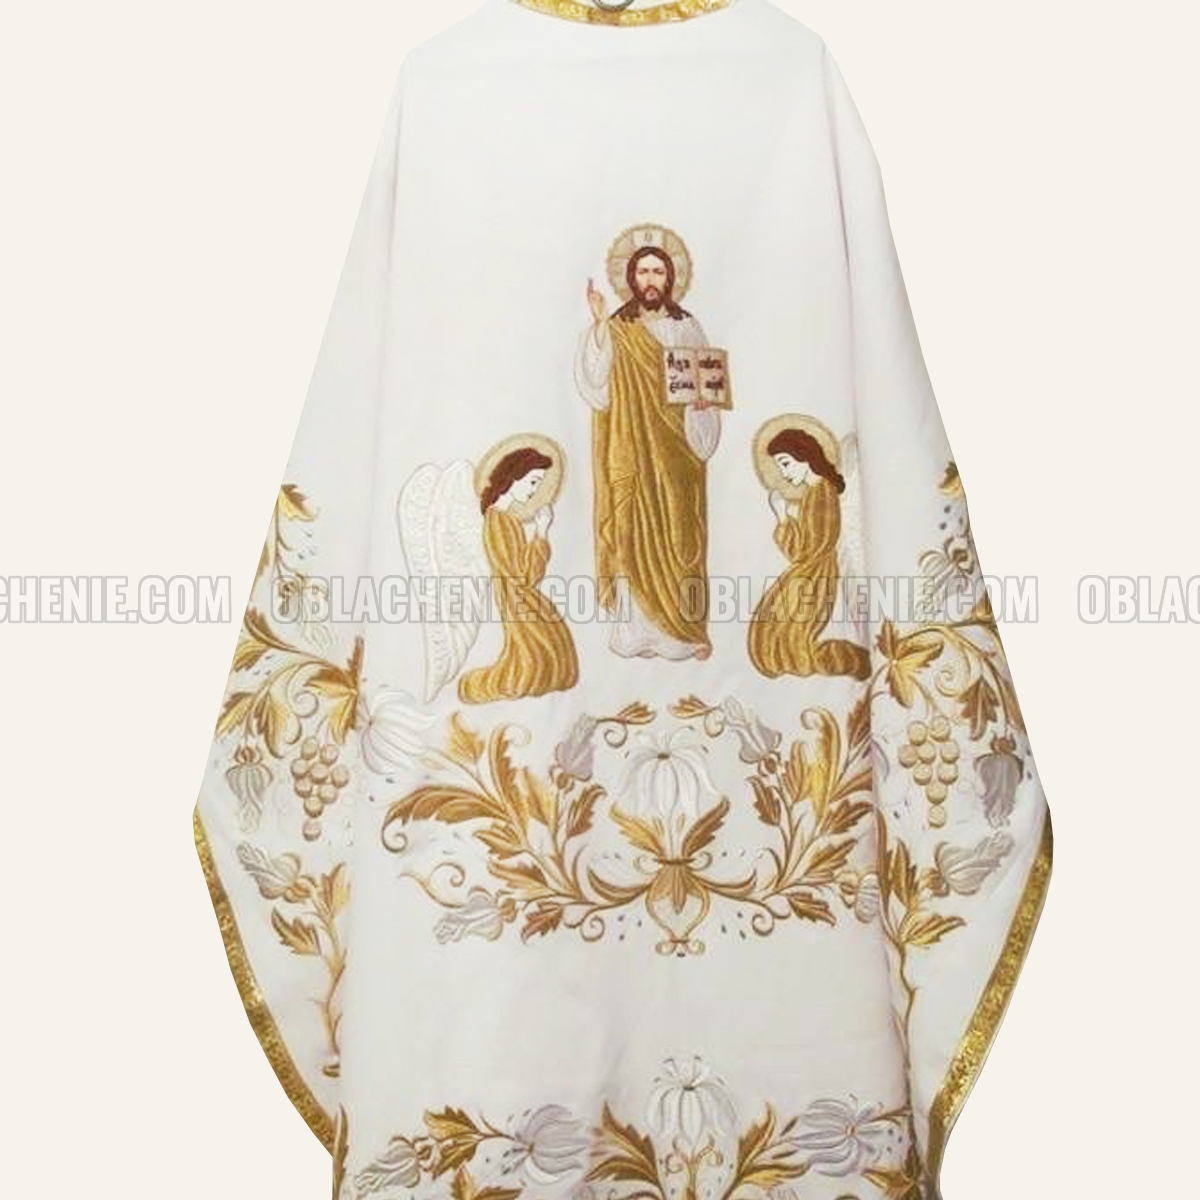 Embroidered priest's vestments 10239